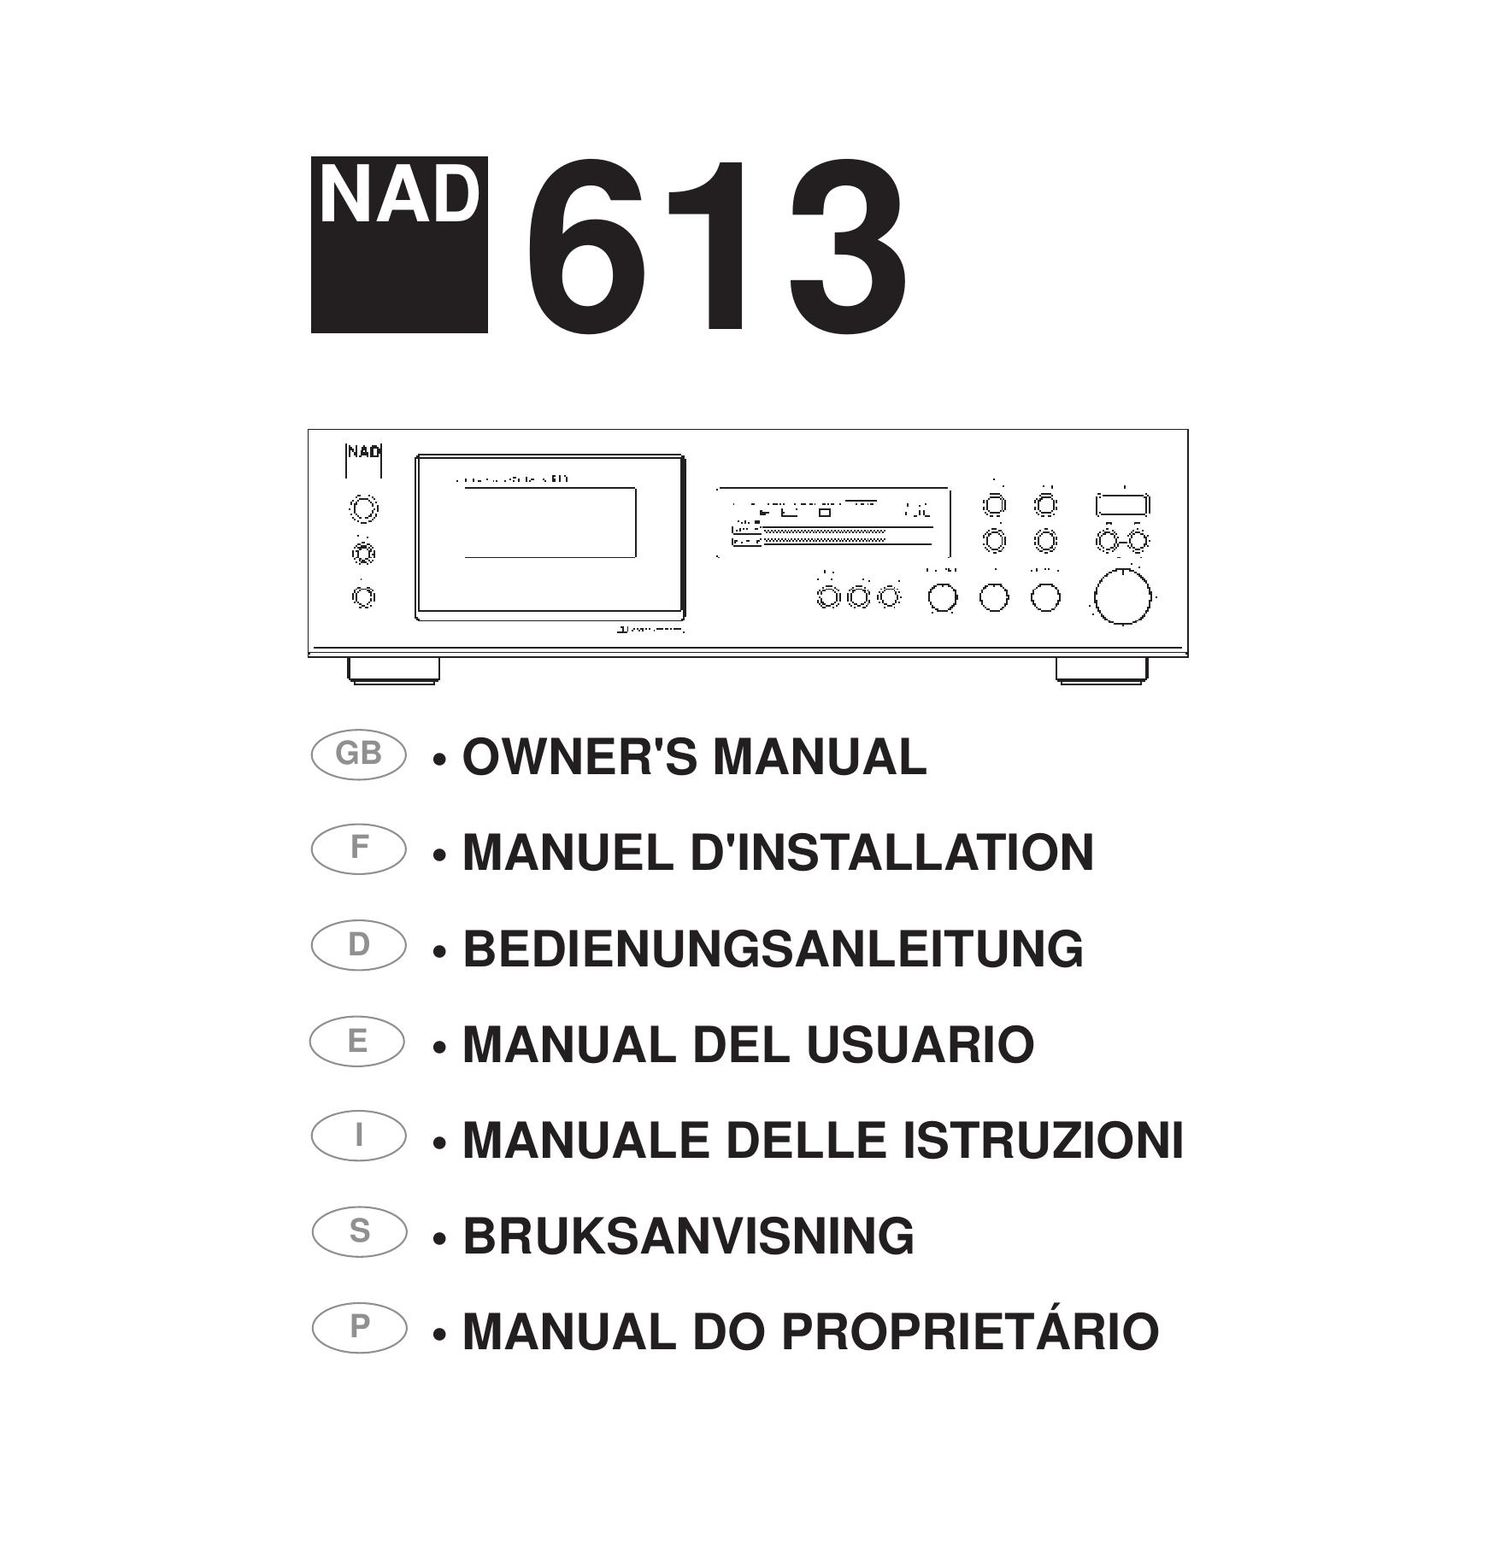 Nad 613 Owners Manual